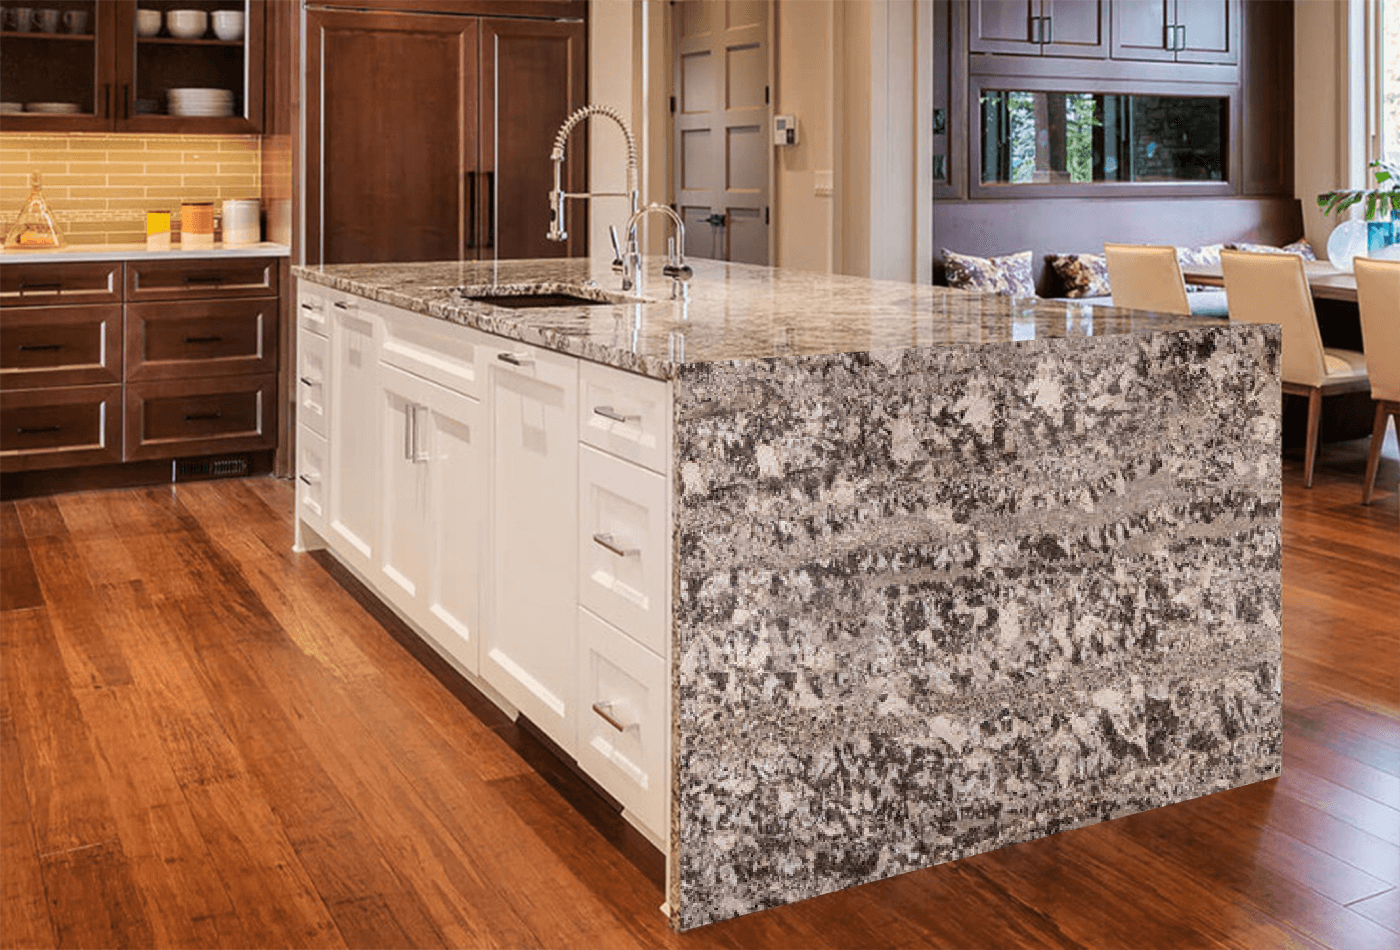 Bianco Antico Granite; Wrap Up Your New kitchen with Us!